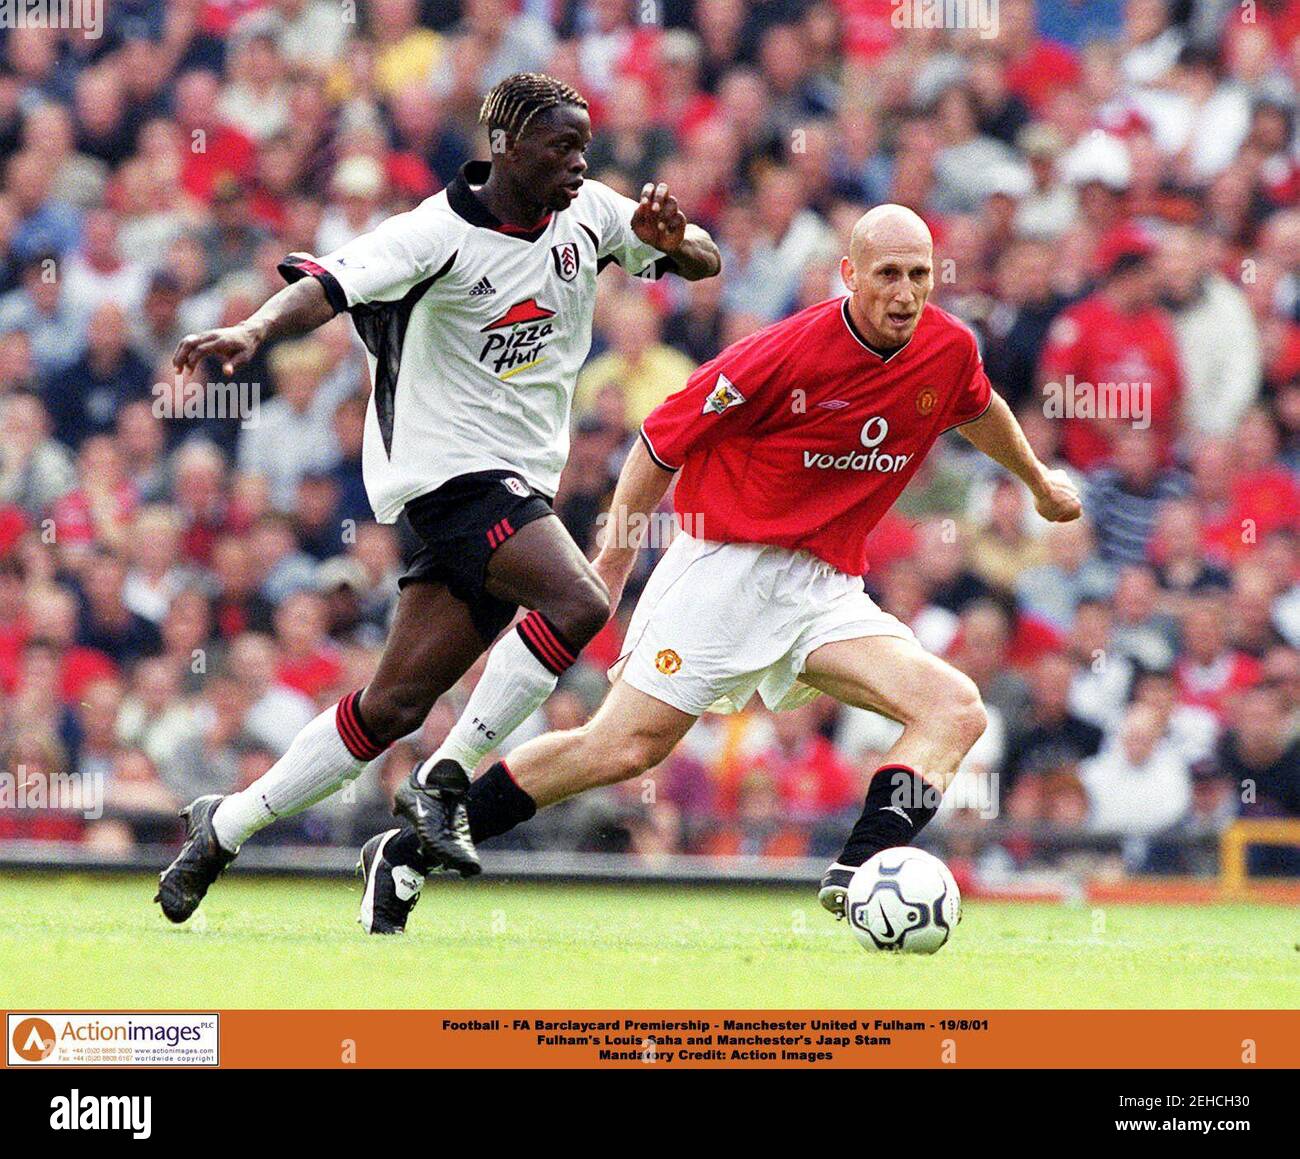 Football - FA Barclaycard Premiership - Manchester United v Fulham - 19/8/01  Fulham's Louis Saha and Manchester's Jaap Stam   Mandatory Credit: Action Images Stock Photo